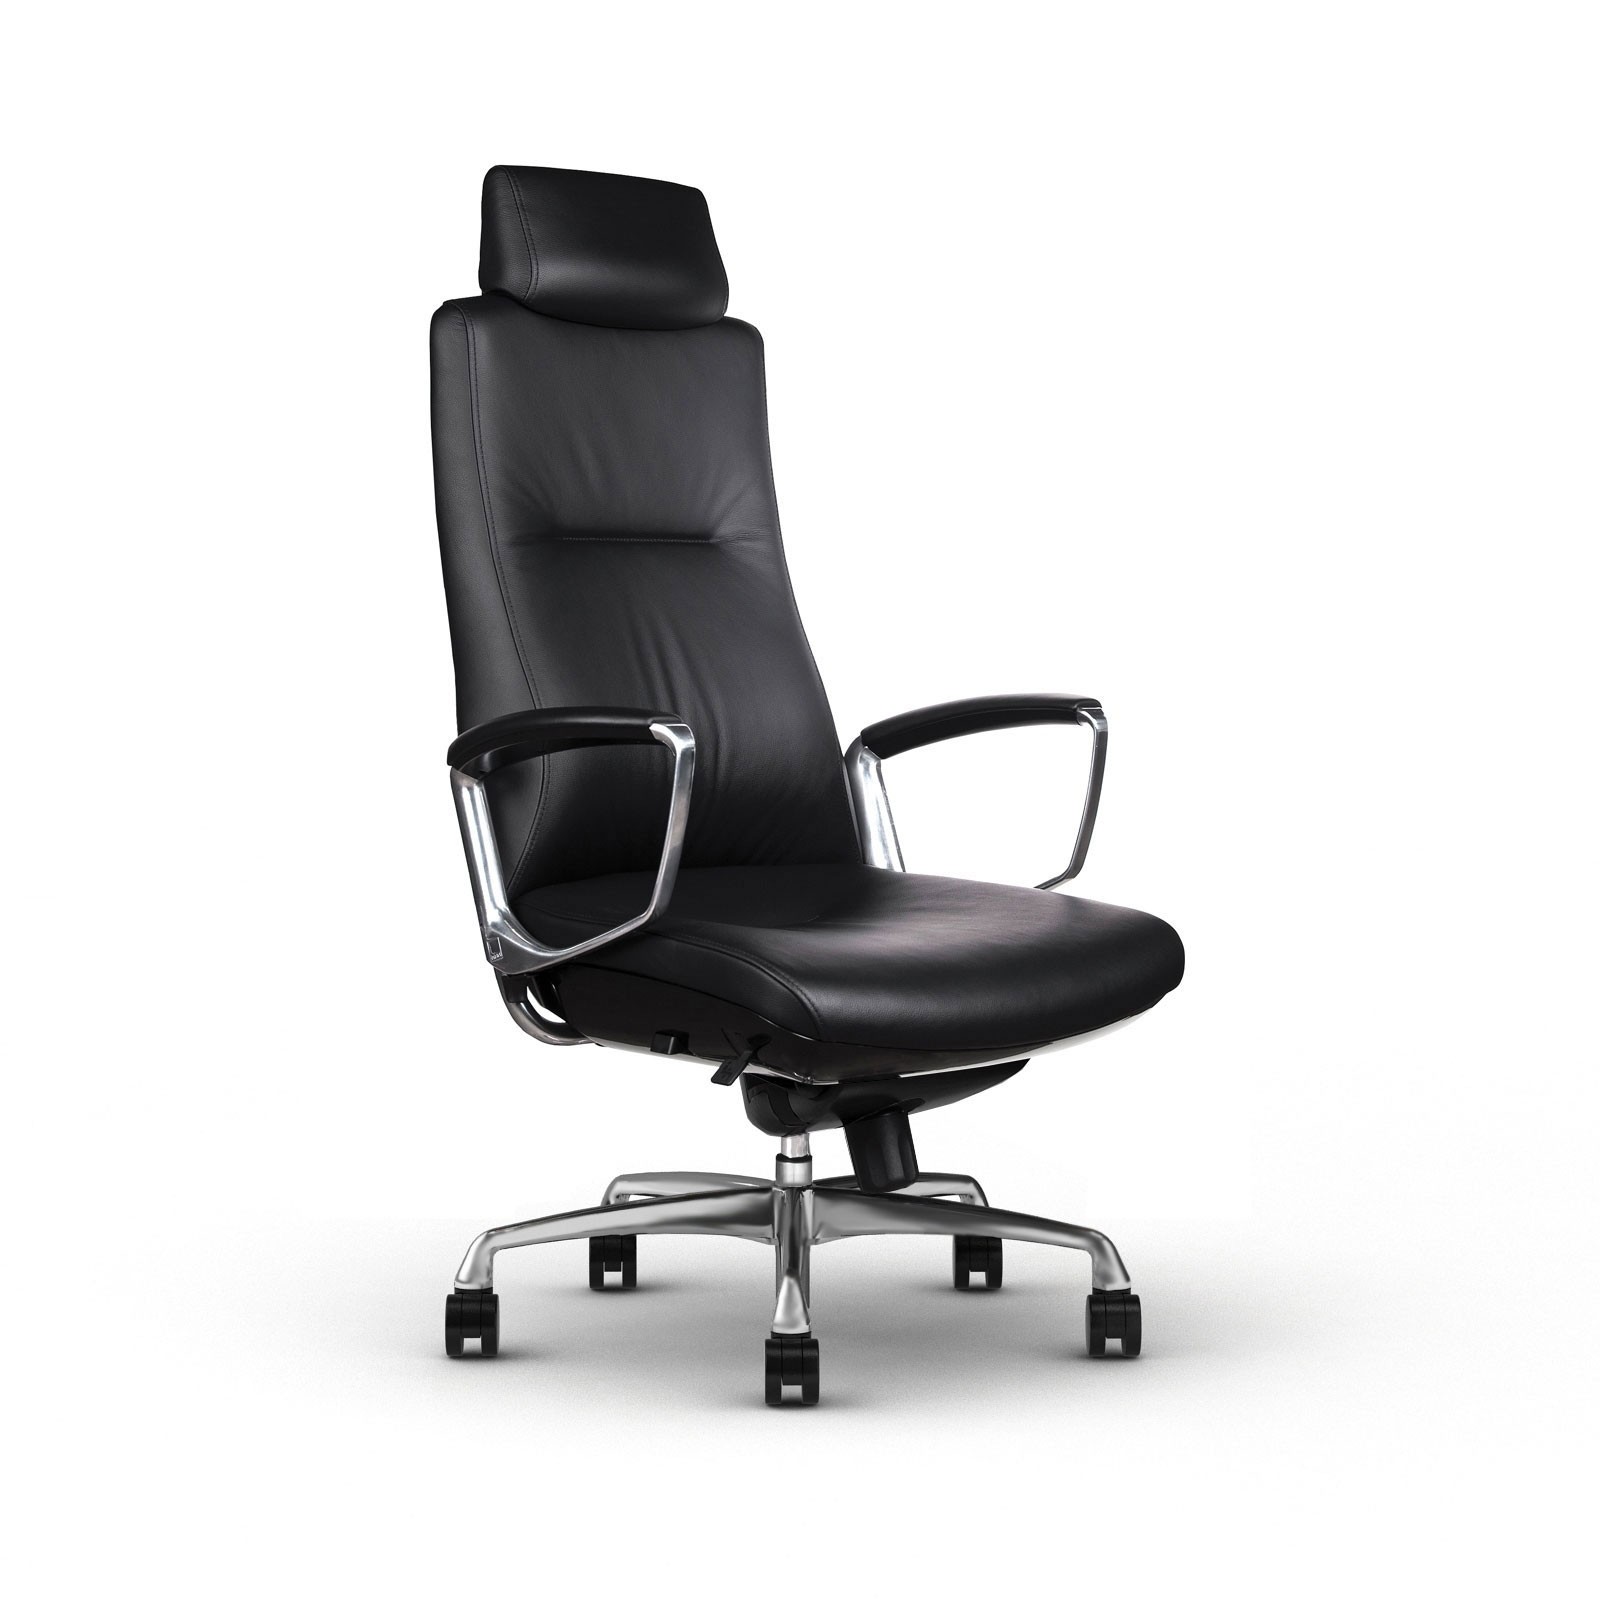 Liven office chair in black leather for executives